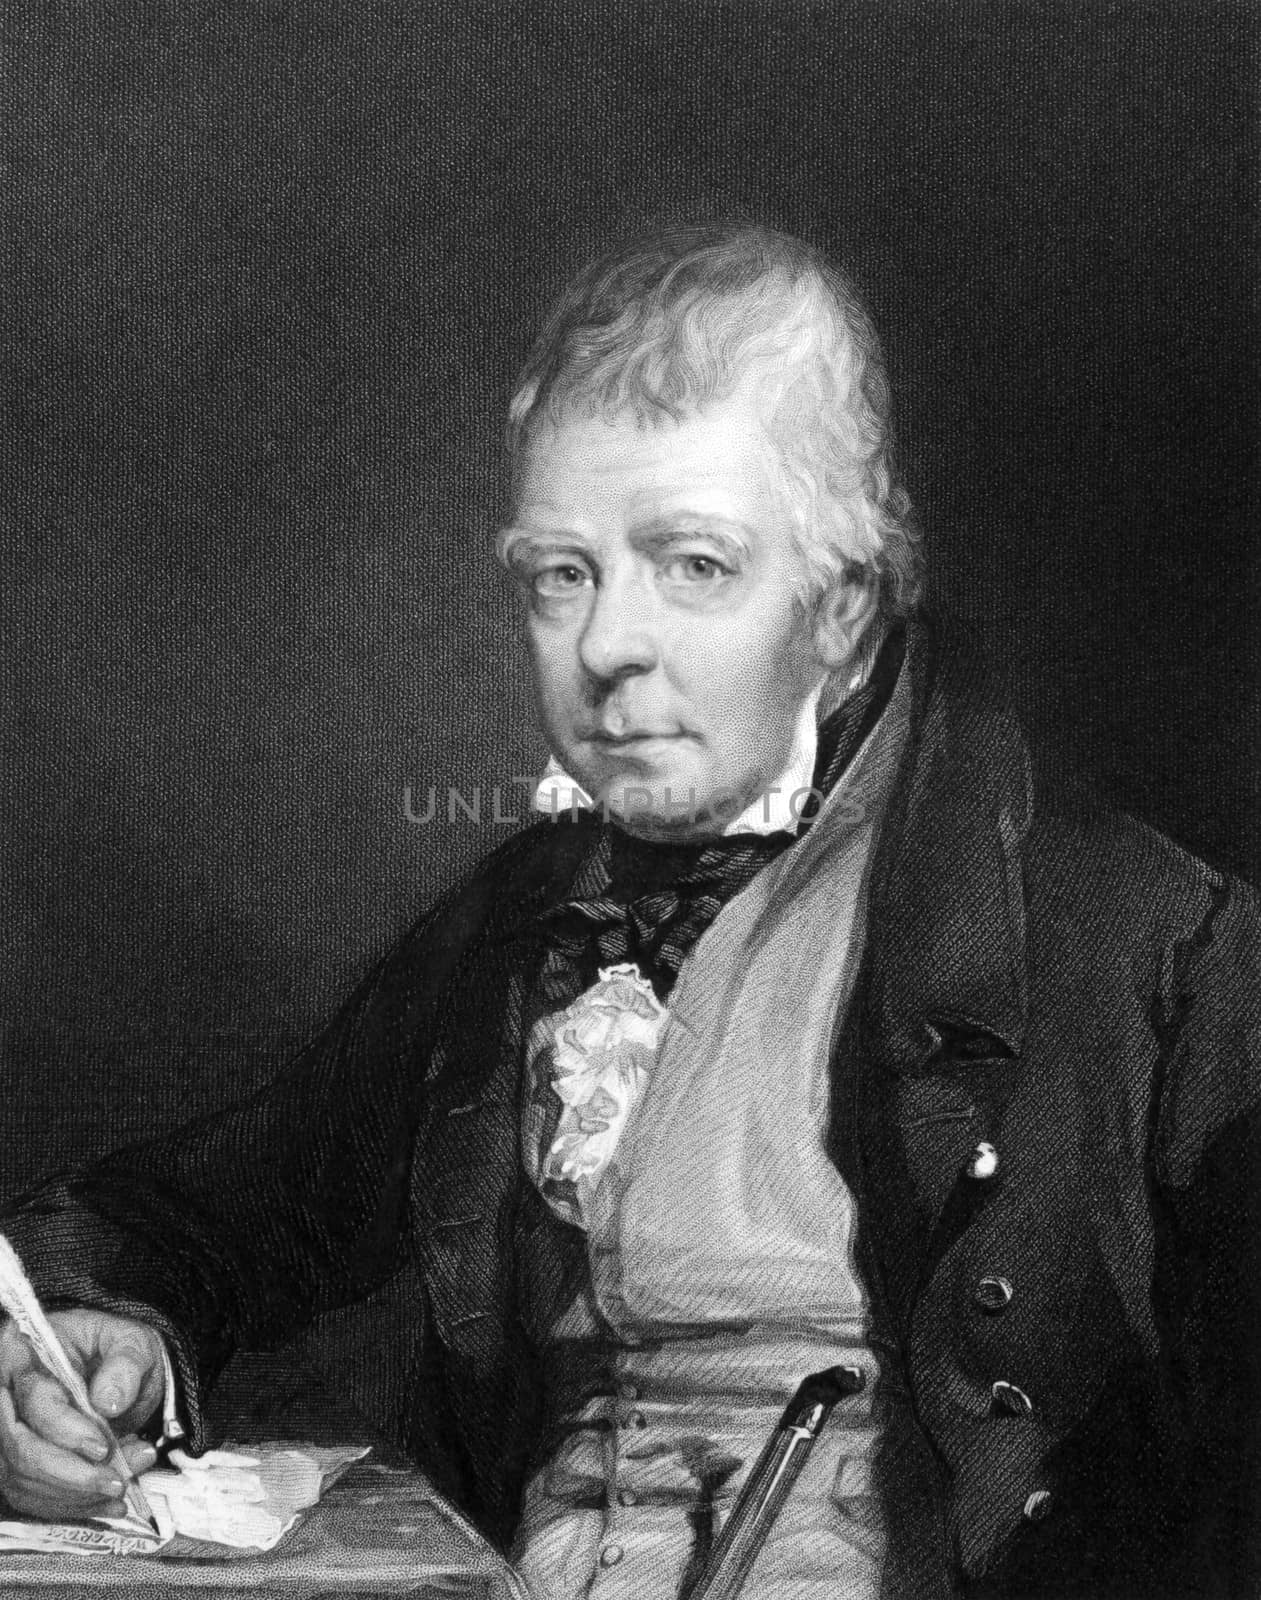 Walter Scott (1771-1832) on engraving from 1834. Scottish historical novelist, playwright and poet. Engraved by H.T.Ryall and published in ''Portraits of Illustrious Personages of Great Britain'',UK,1834.